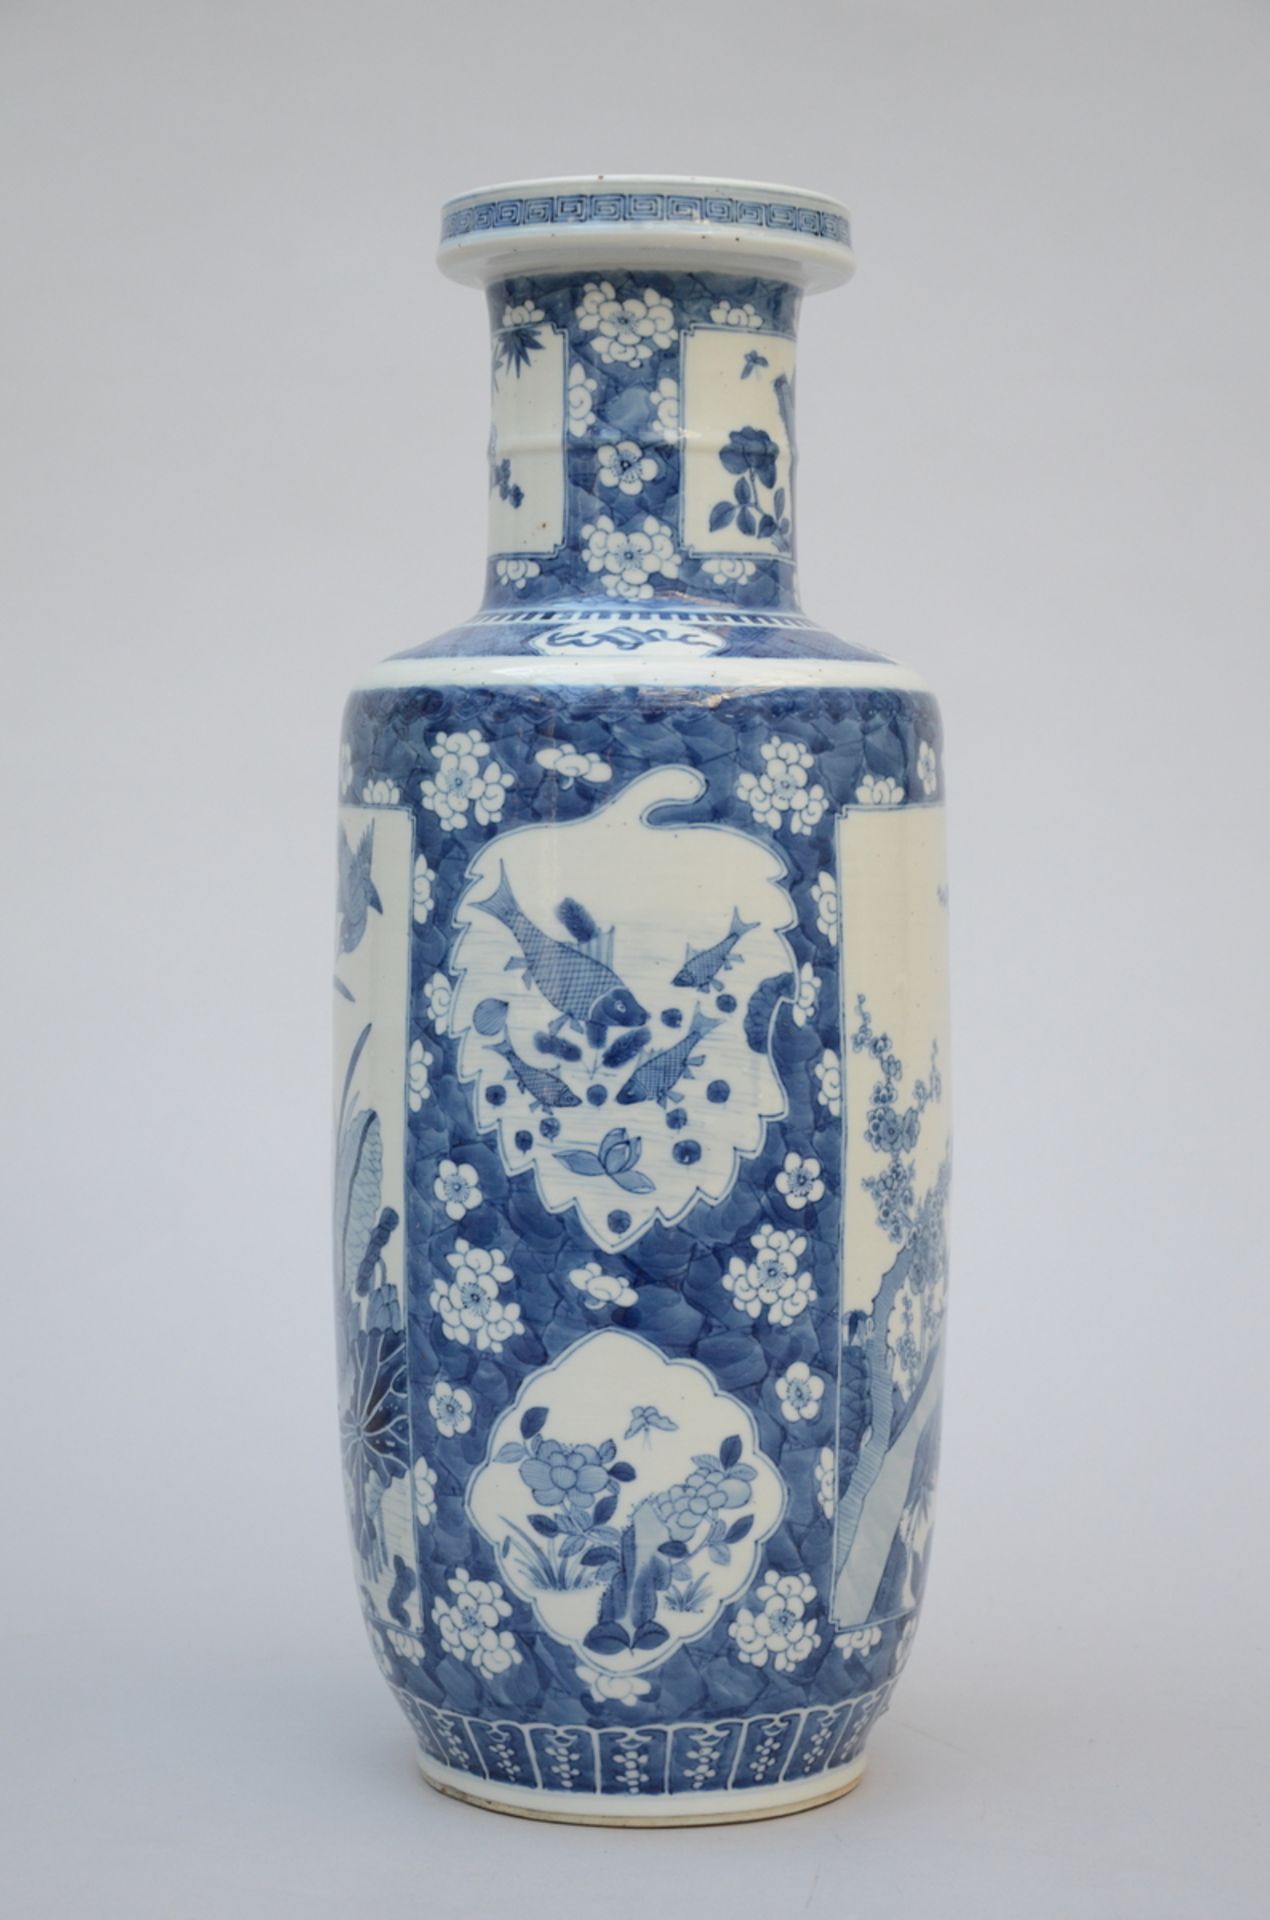 Chinese rouleau vase in blue and white porcelain 'flowers', 19th century (h47cm) - Image 2 of 5